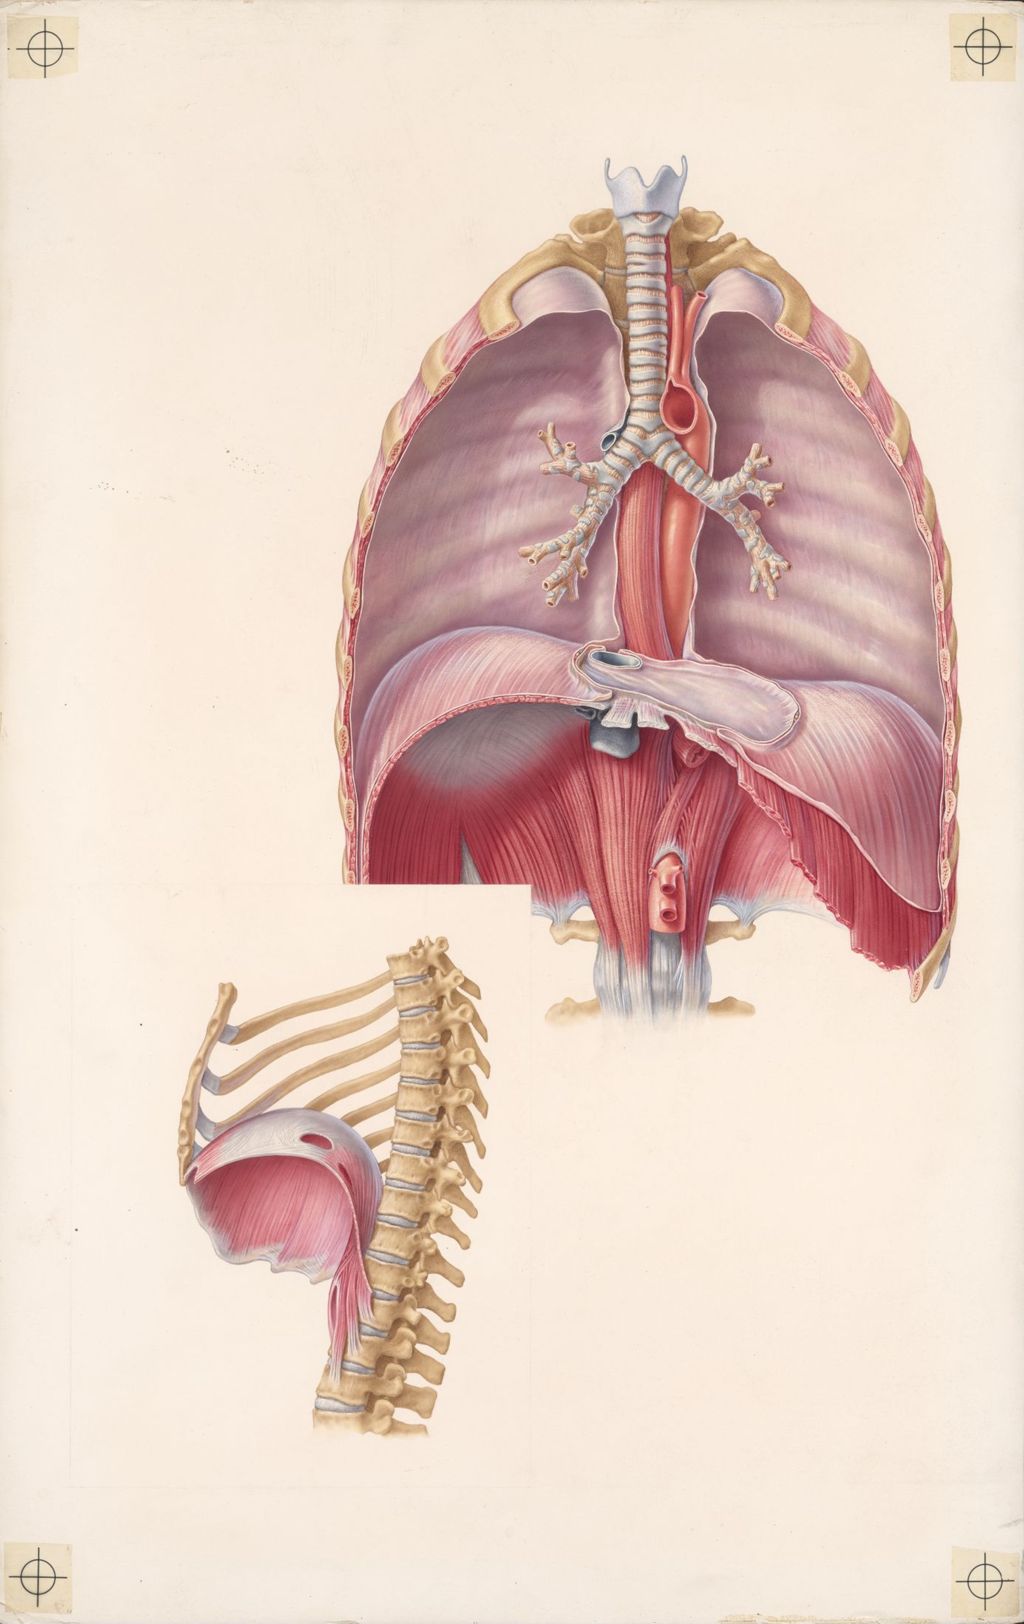 Doctor-Patient explanatory atlas of anatomy, Casts of the cavities (chambers) of the heart and great vessels